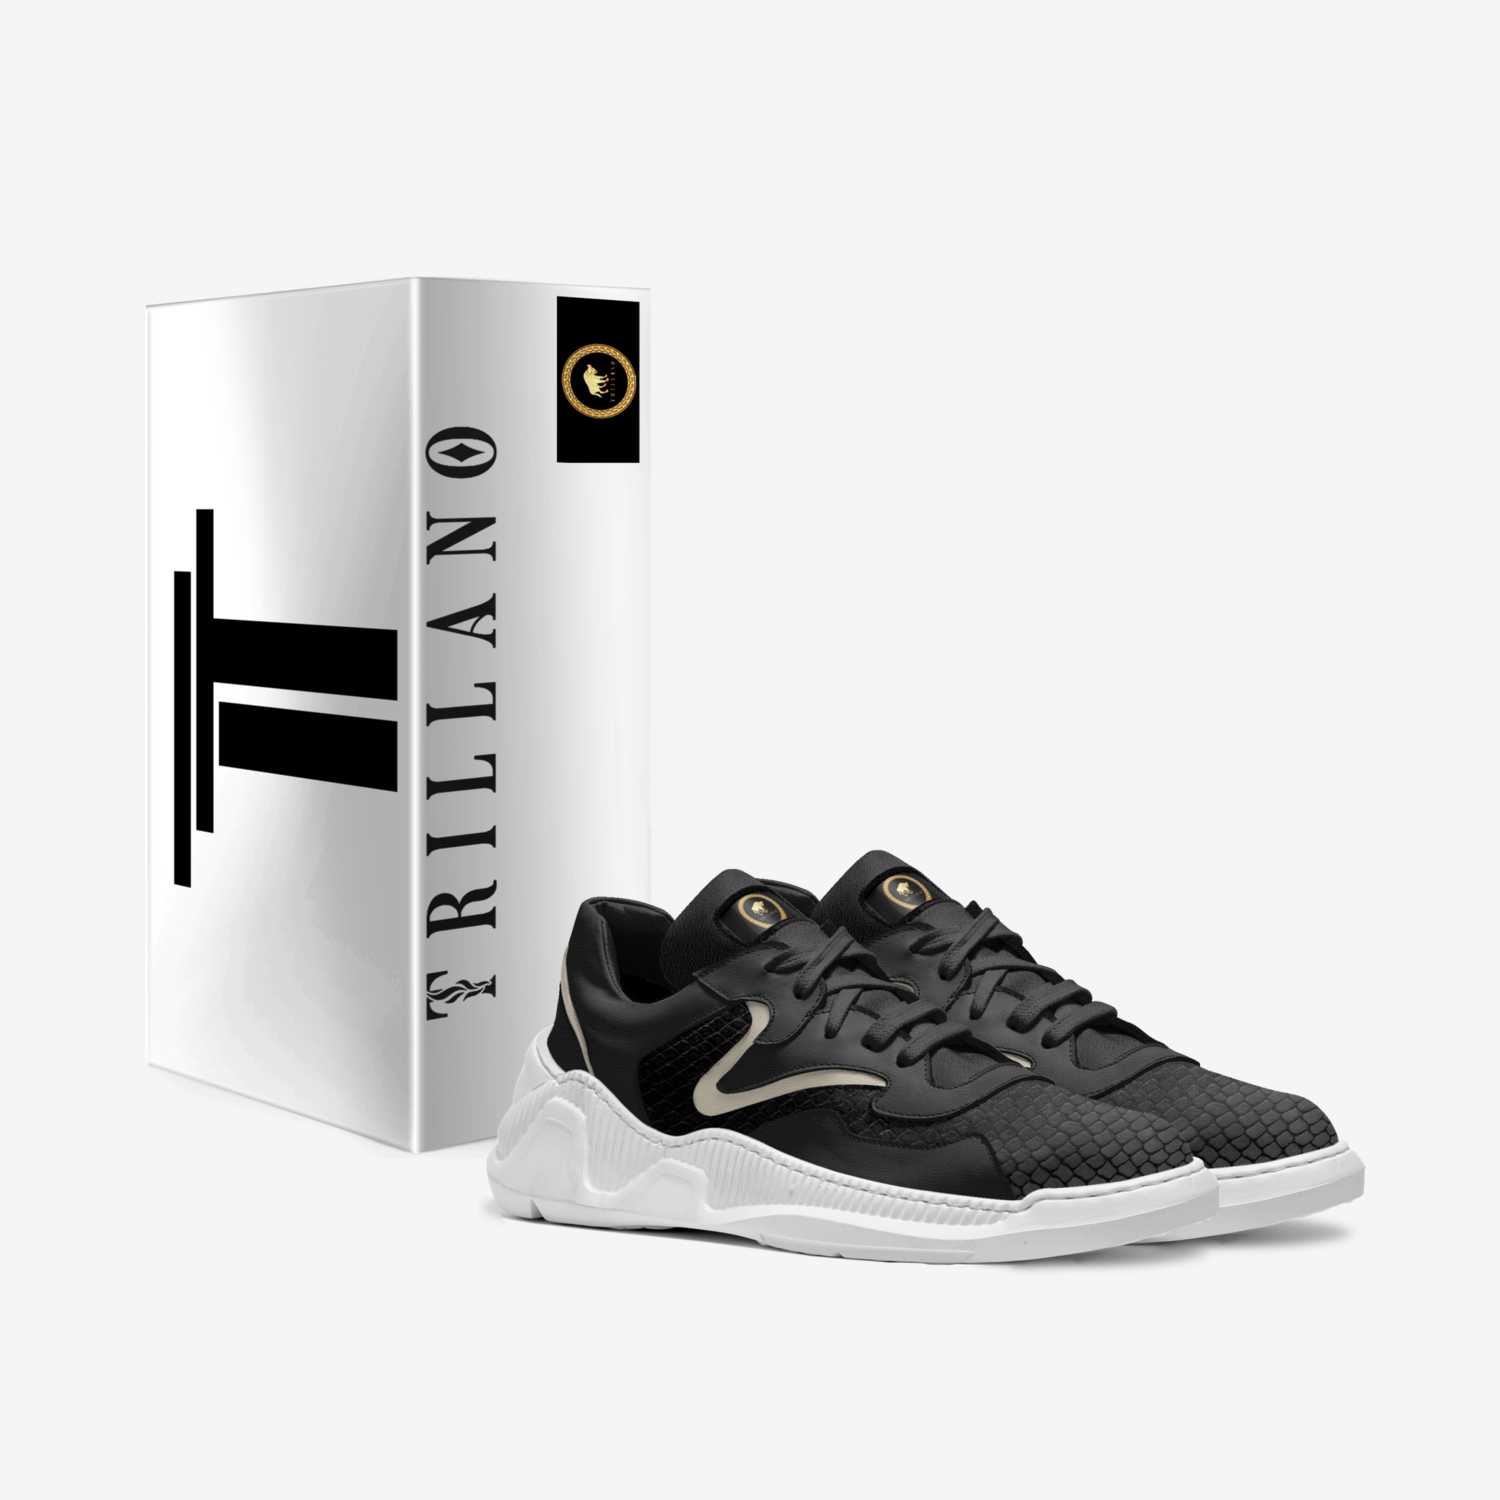 TRILL18 custom made in Italy shoes by Trillano Adisa | Box view